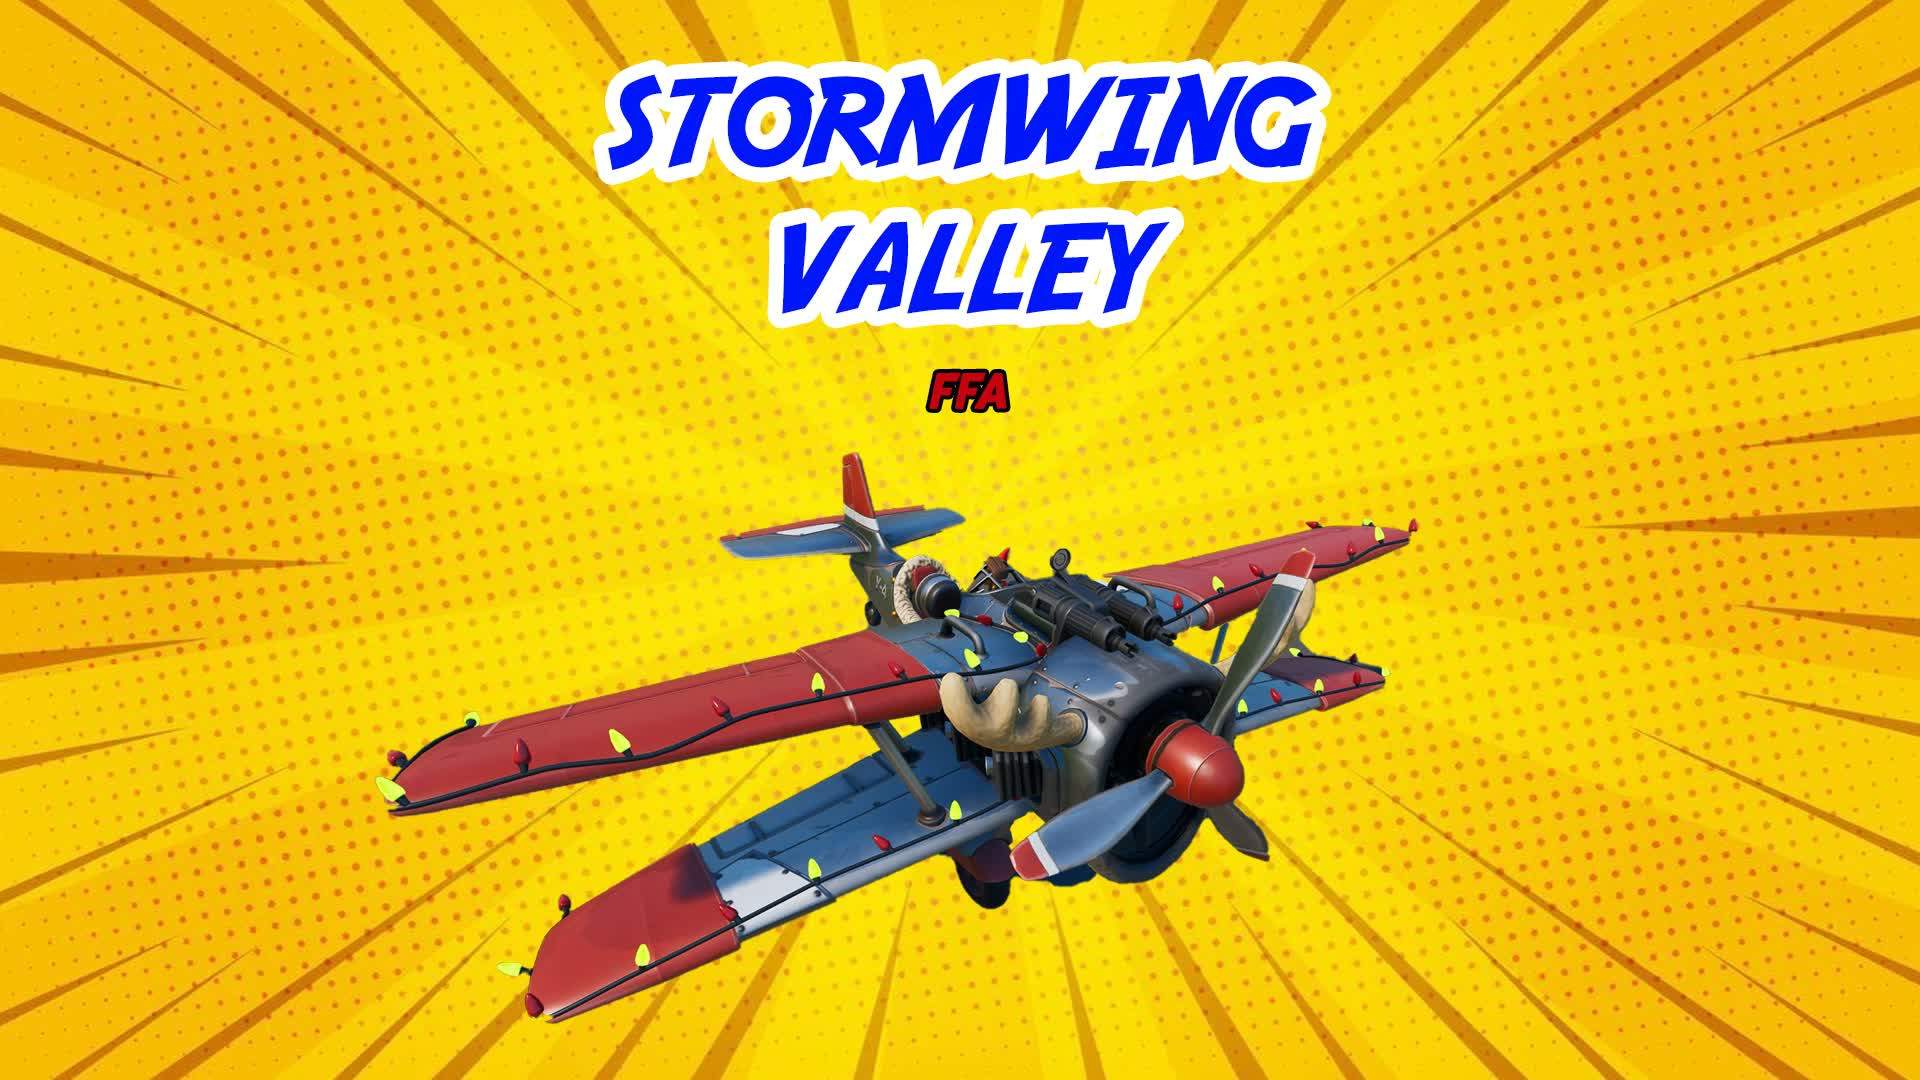 Stormwing Valley